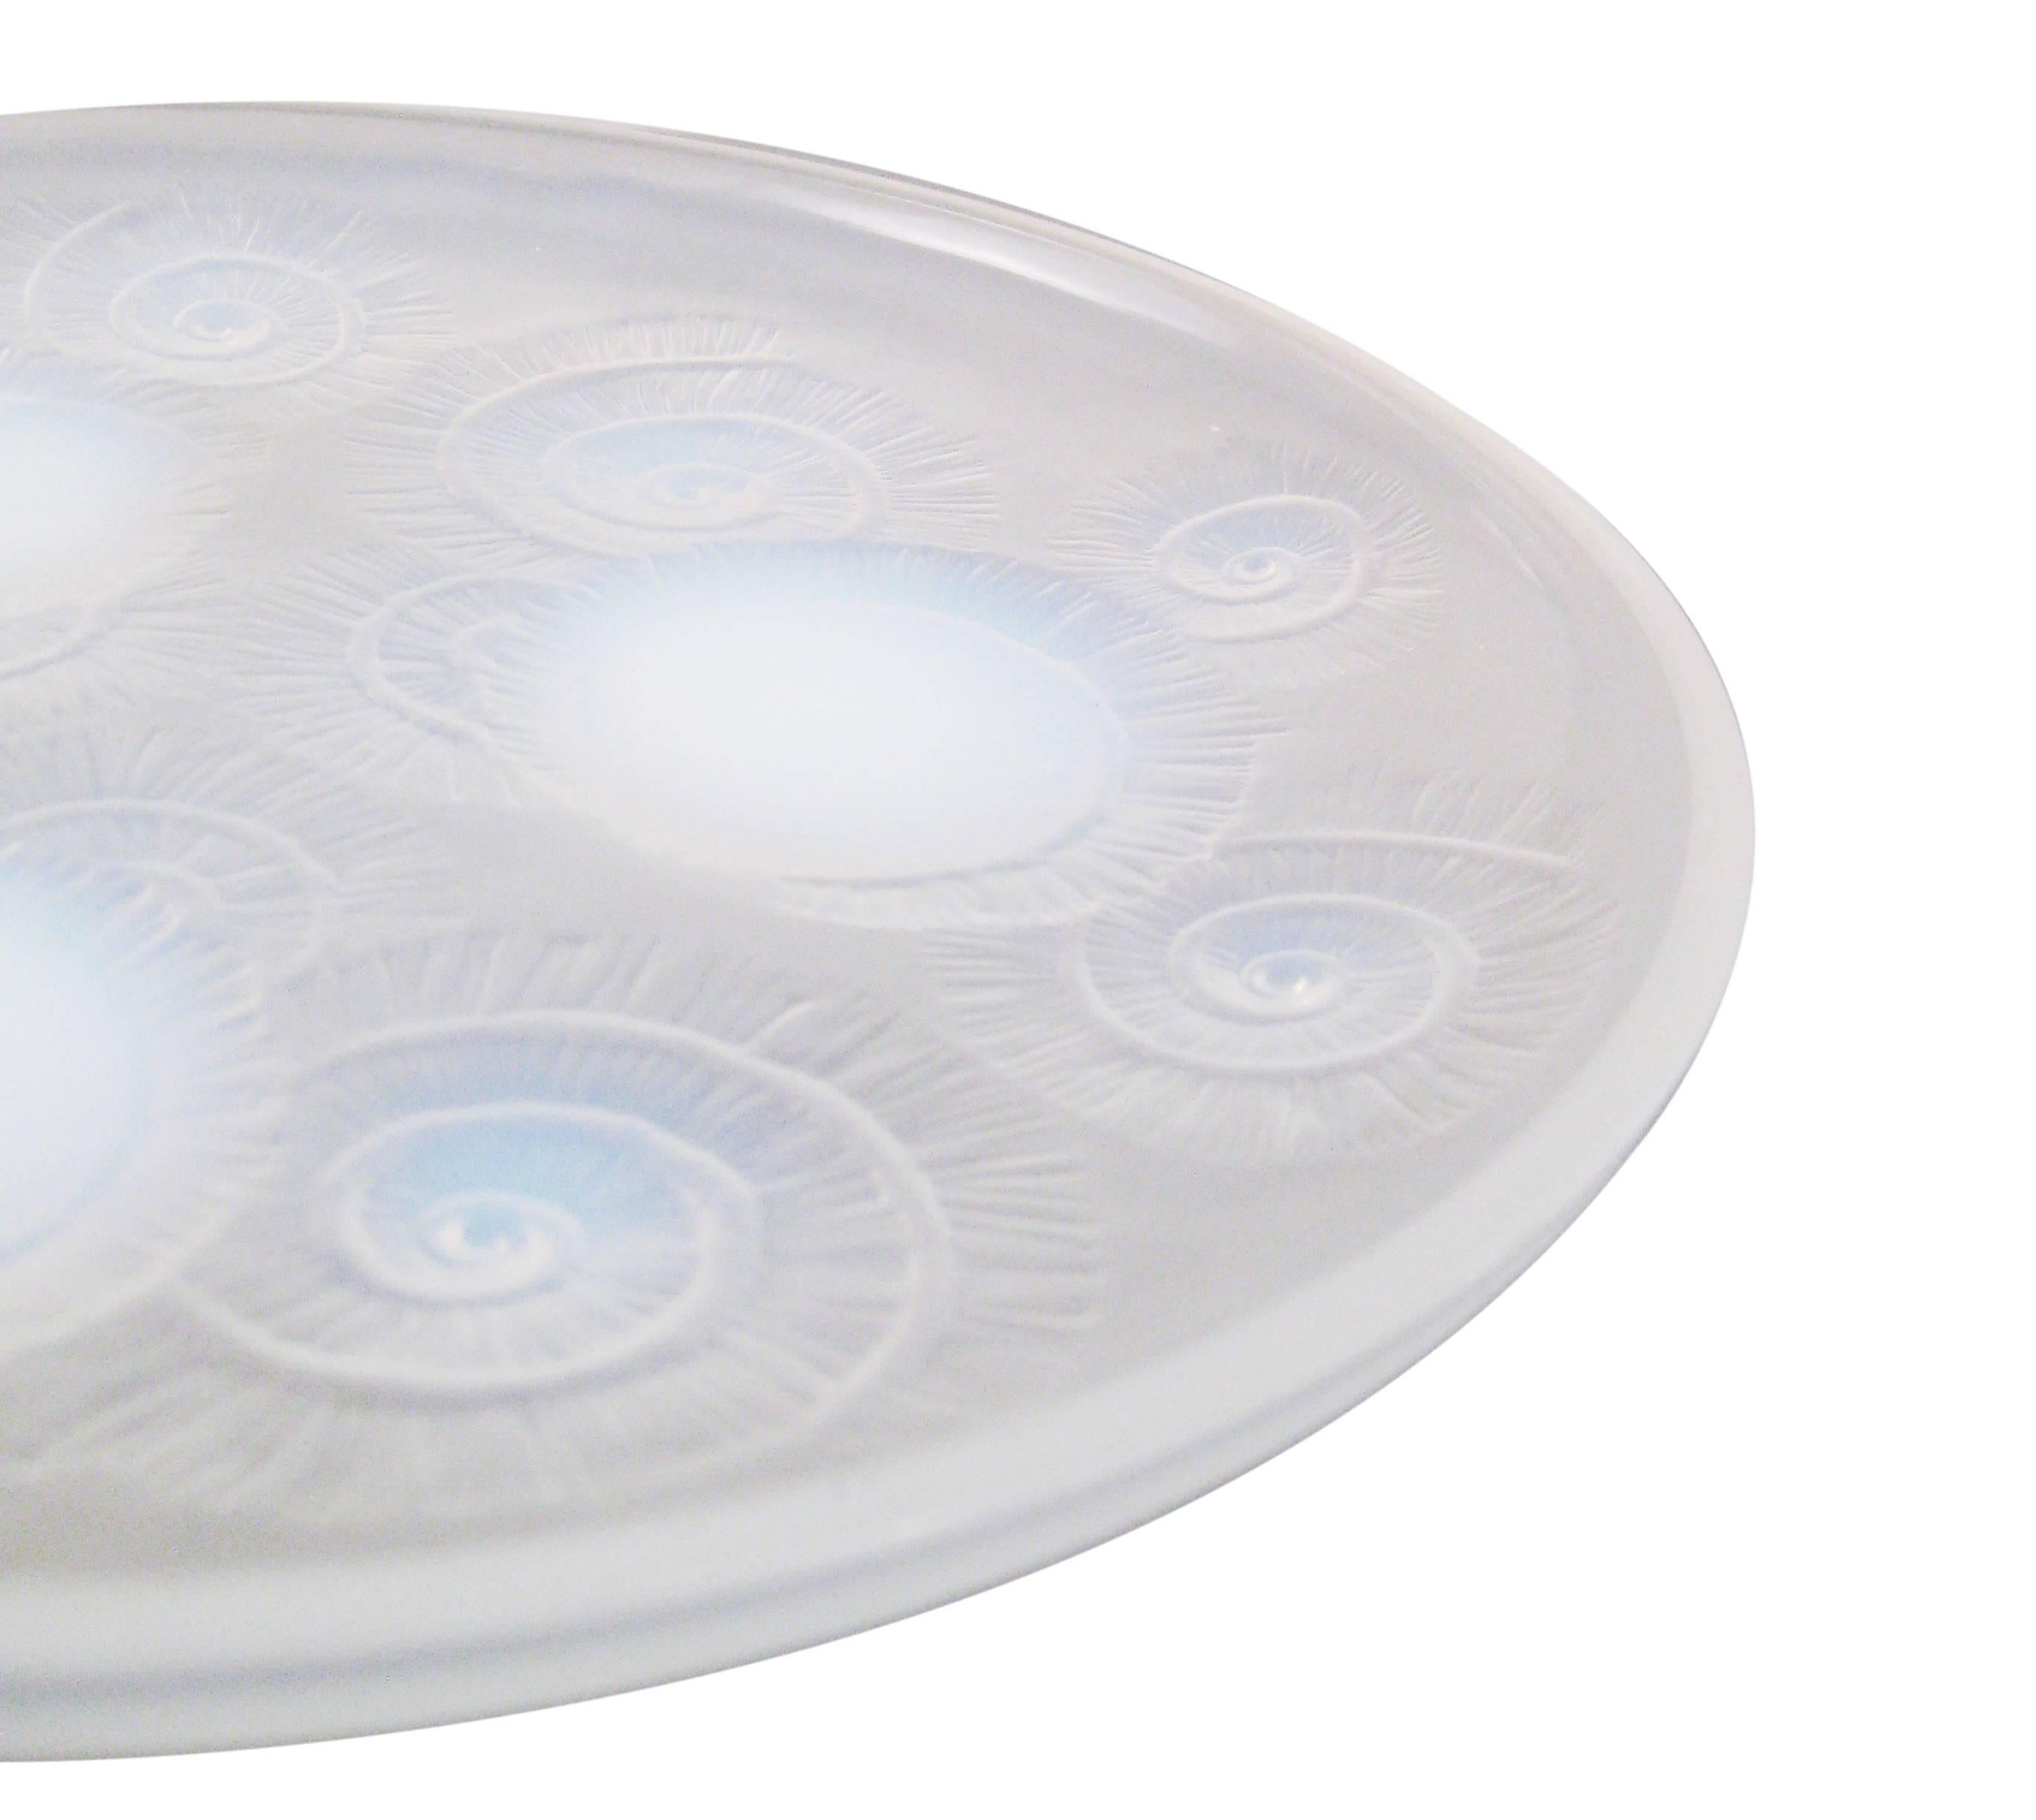 20th Century Opalecent Footed Plate, Marius Ernest Sabino, France, circa 1930 For Sale